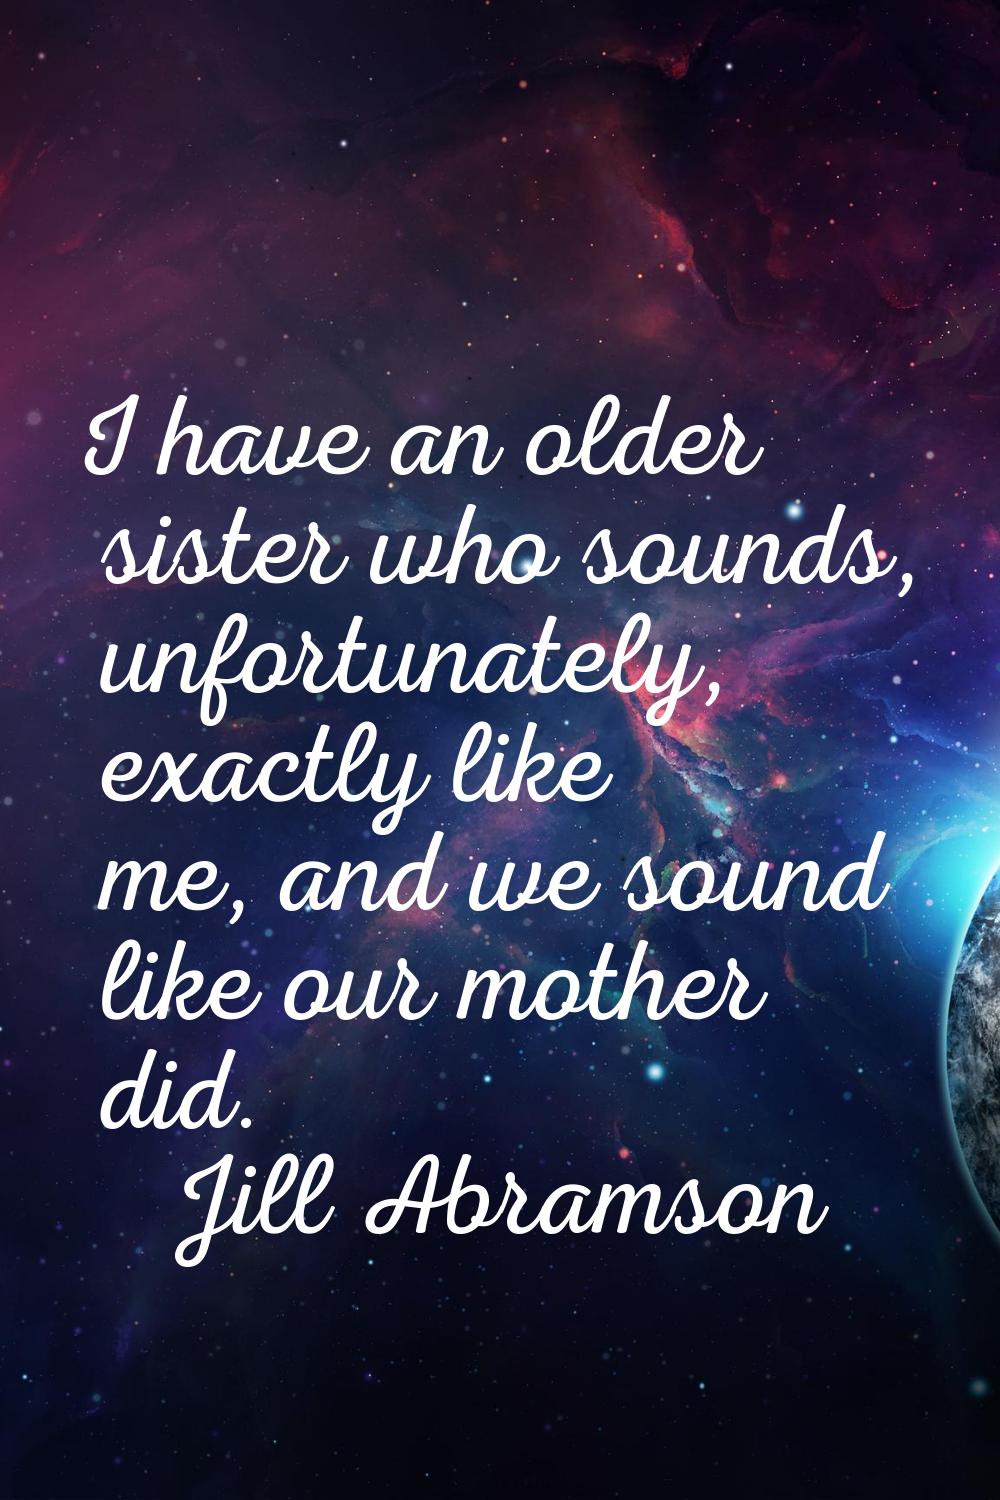 I have an older sister who sounds, unfortunately, exactly like me, and we sound like our mother did